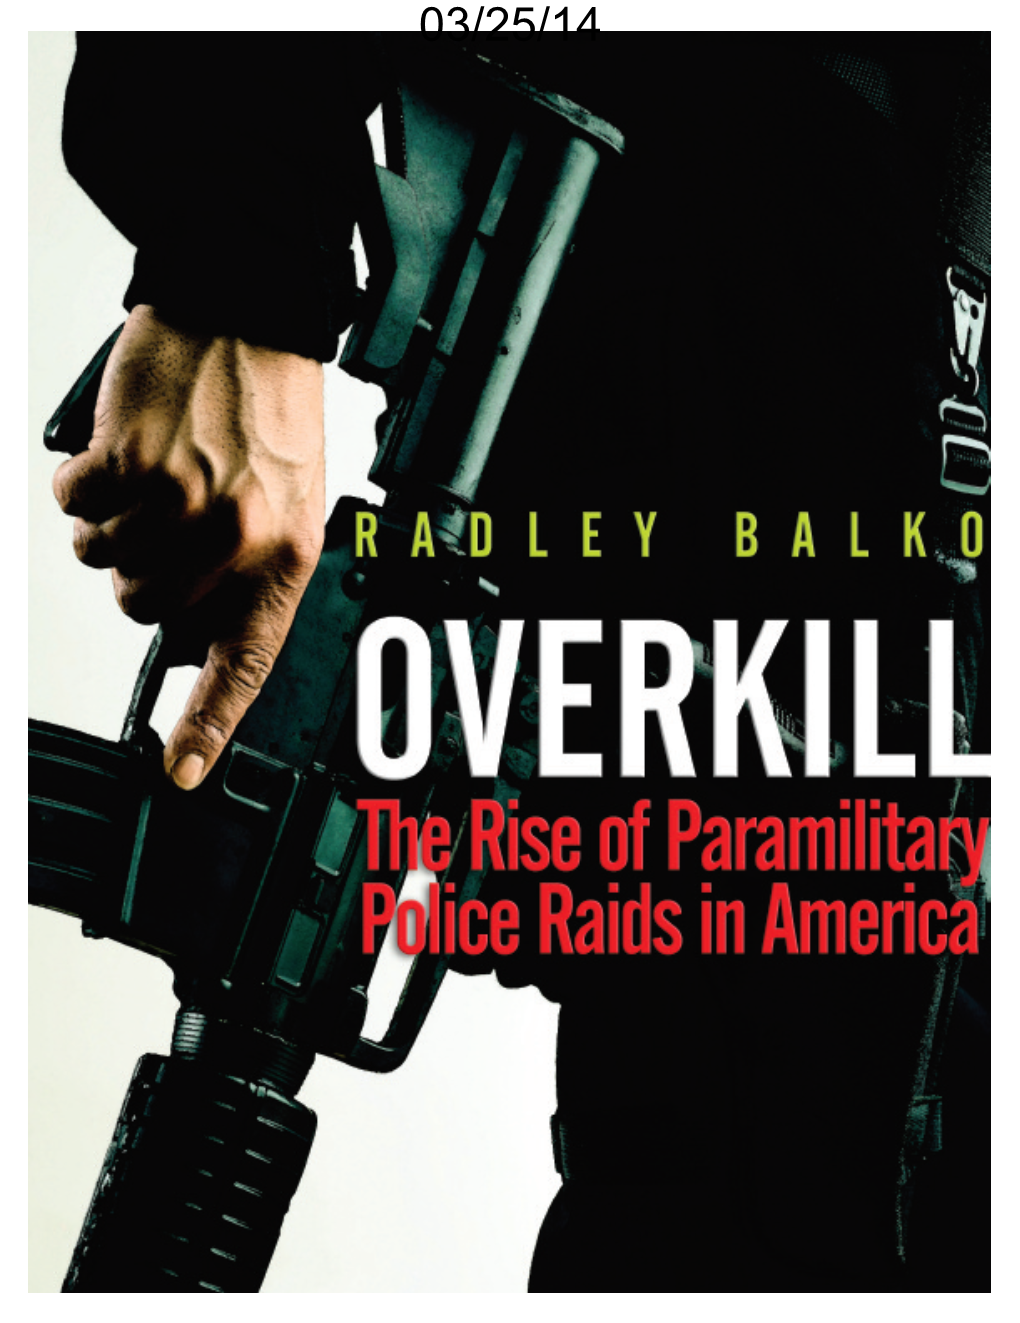 The Rise of Paramilitary Police Raids in America